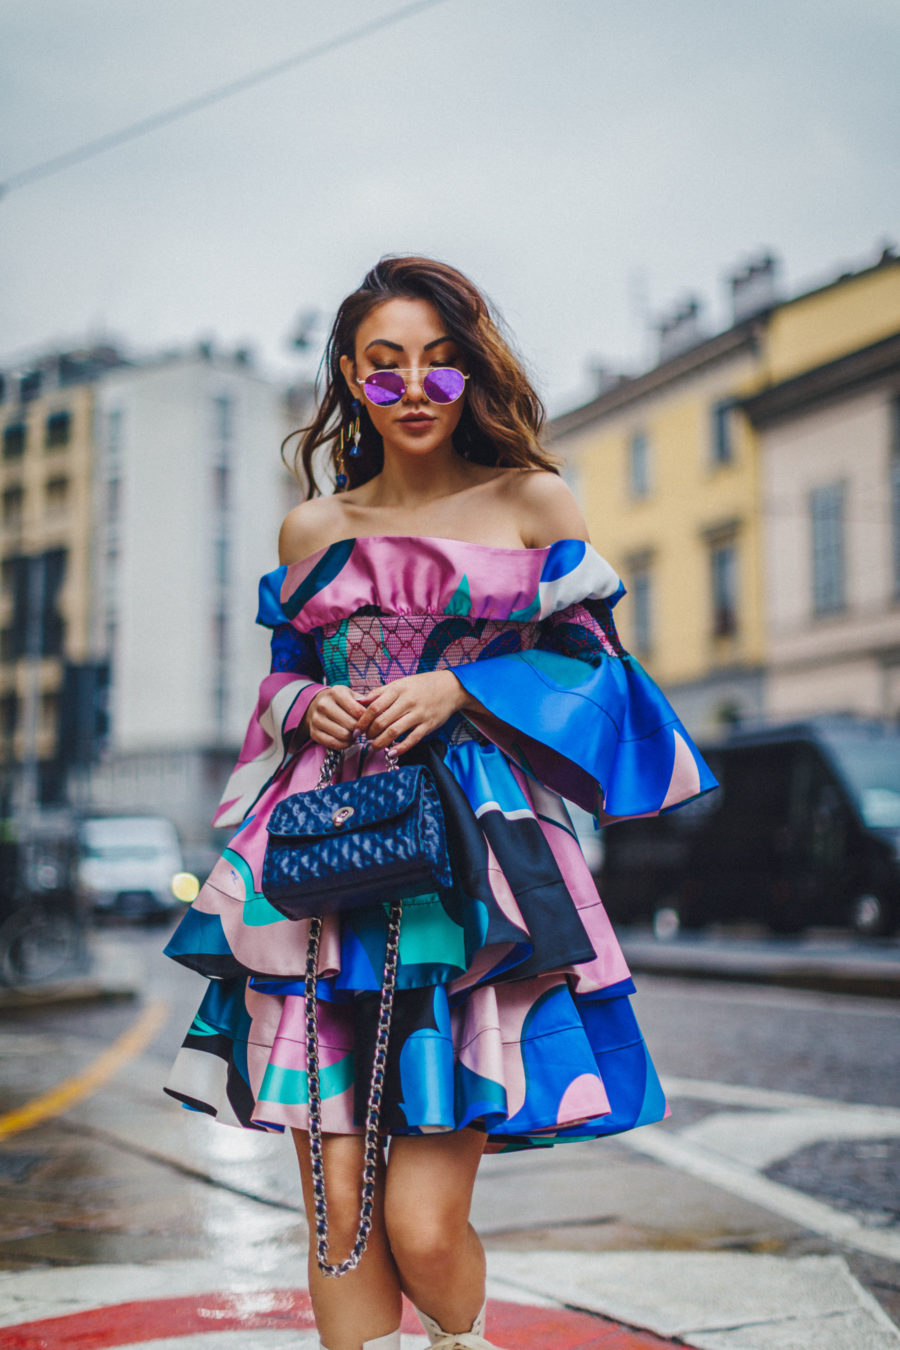 Shopbop Sale Alert - The Best Spring and Summer Items To Buy, Bold Statement Dresses, Off the shoulder dresses, Colorblock Dresses, Paris Streetstyle, Jessica Wang // NotJessFashion.com